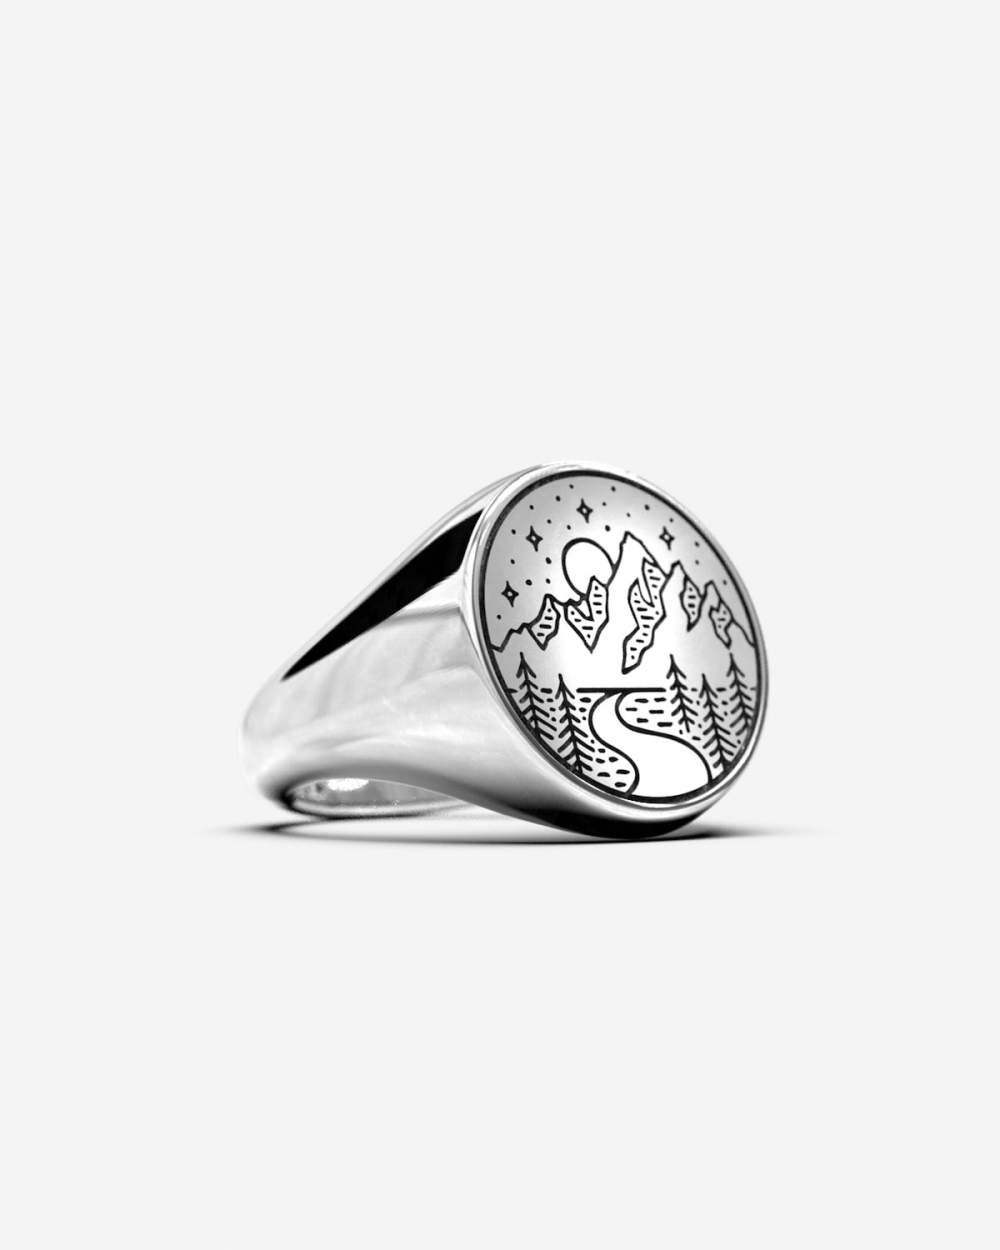 ROUND SIGNET RING WITH ENGRAVING